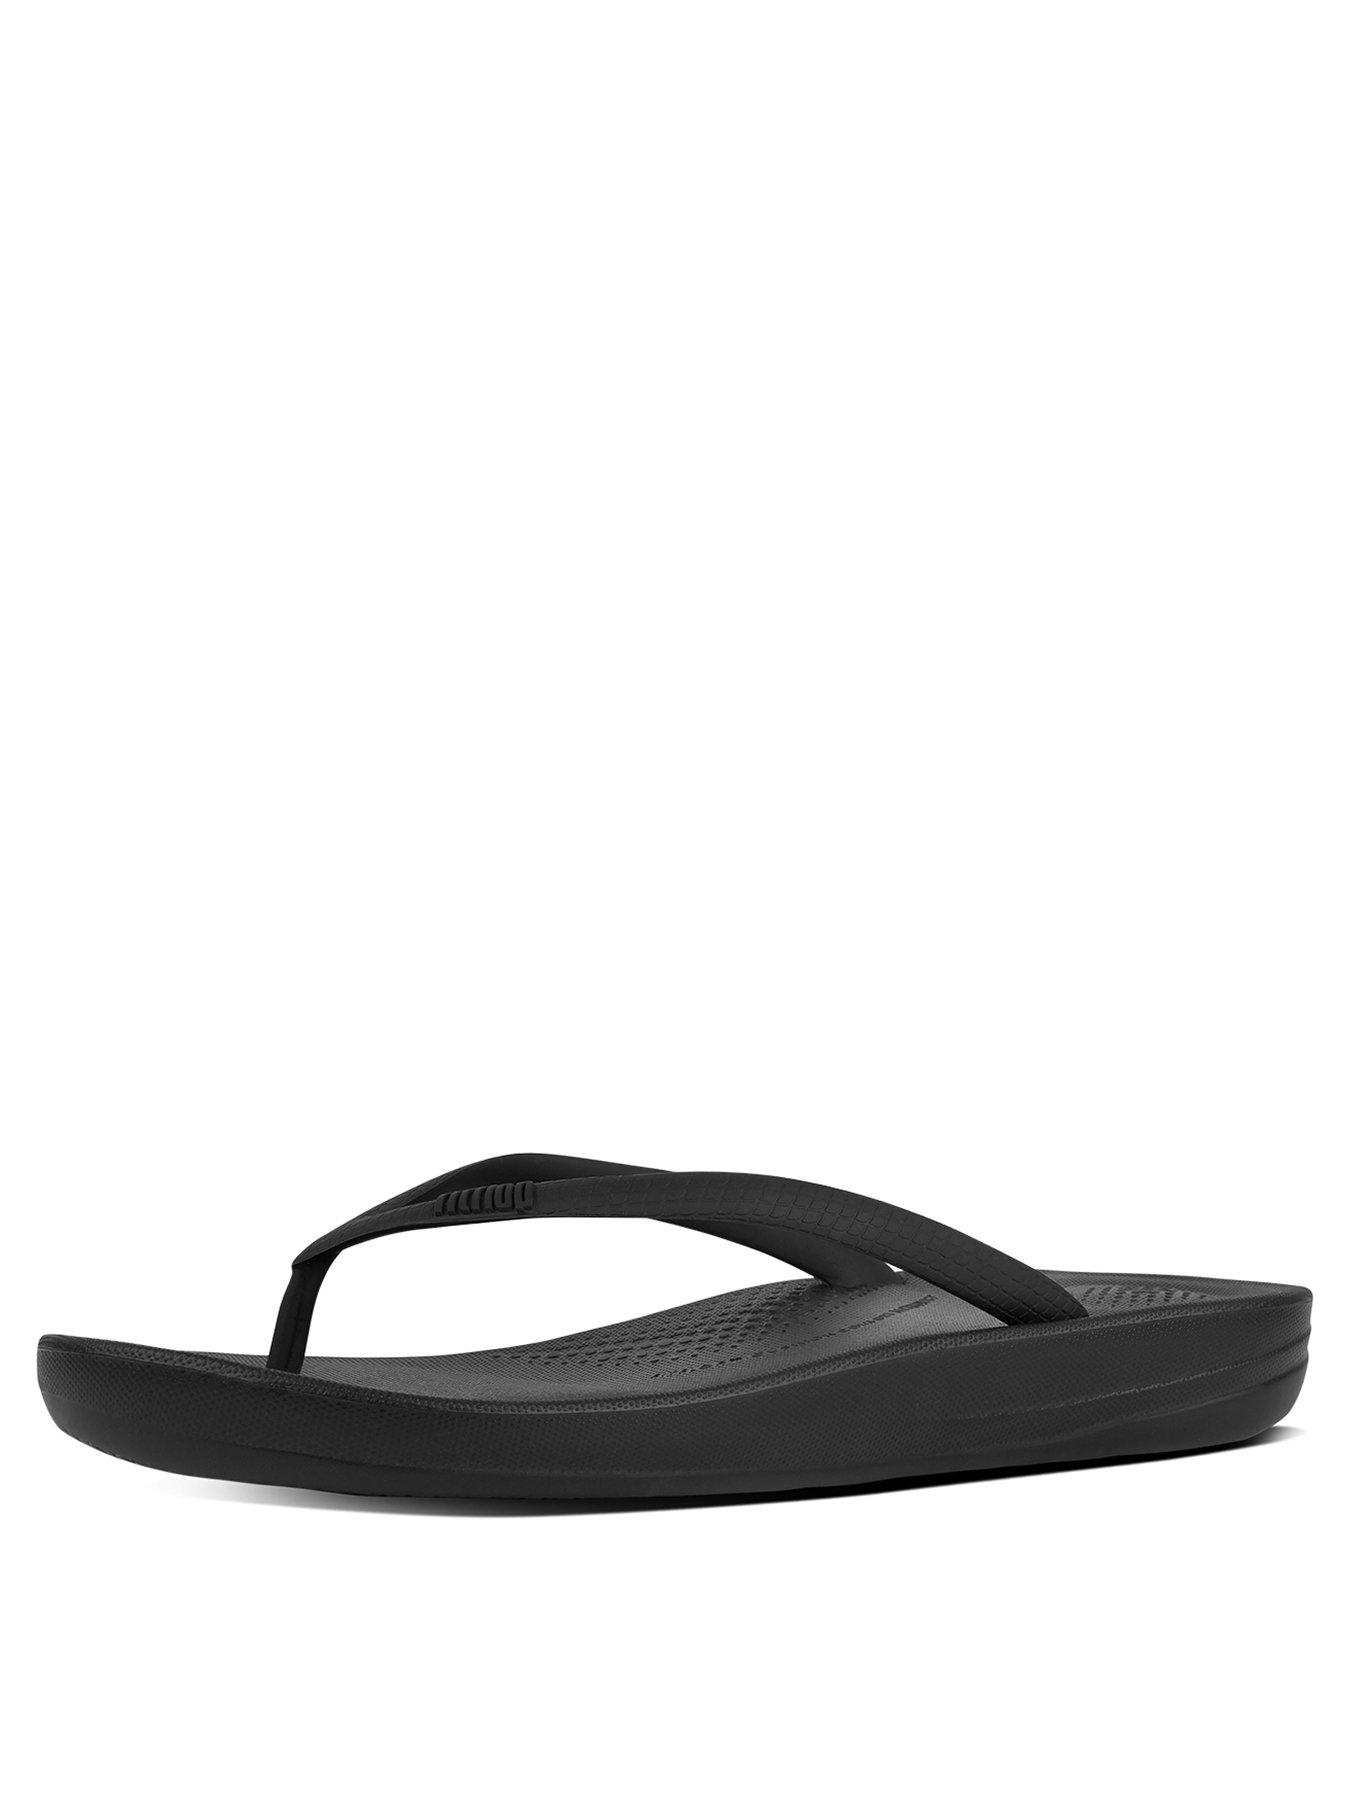 best price fitflops